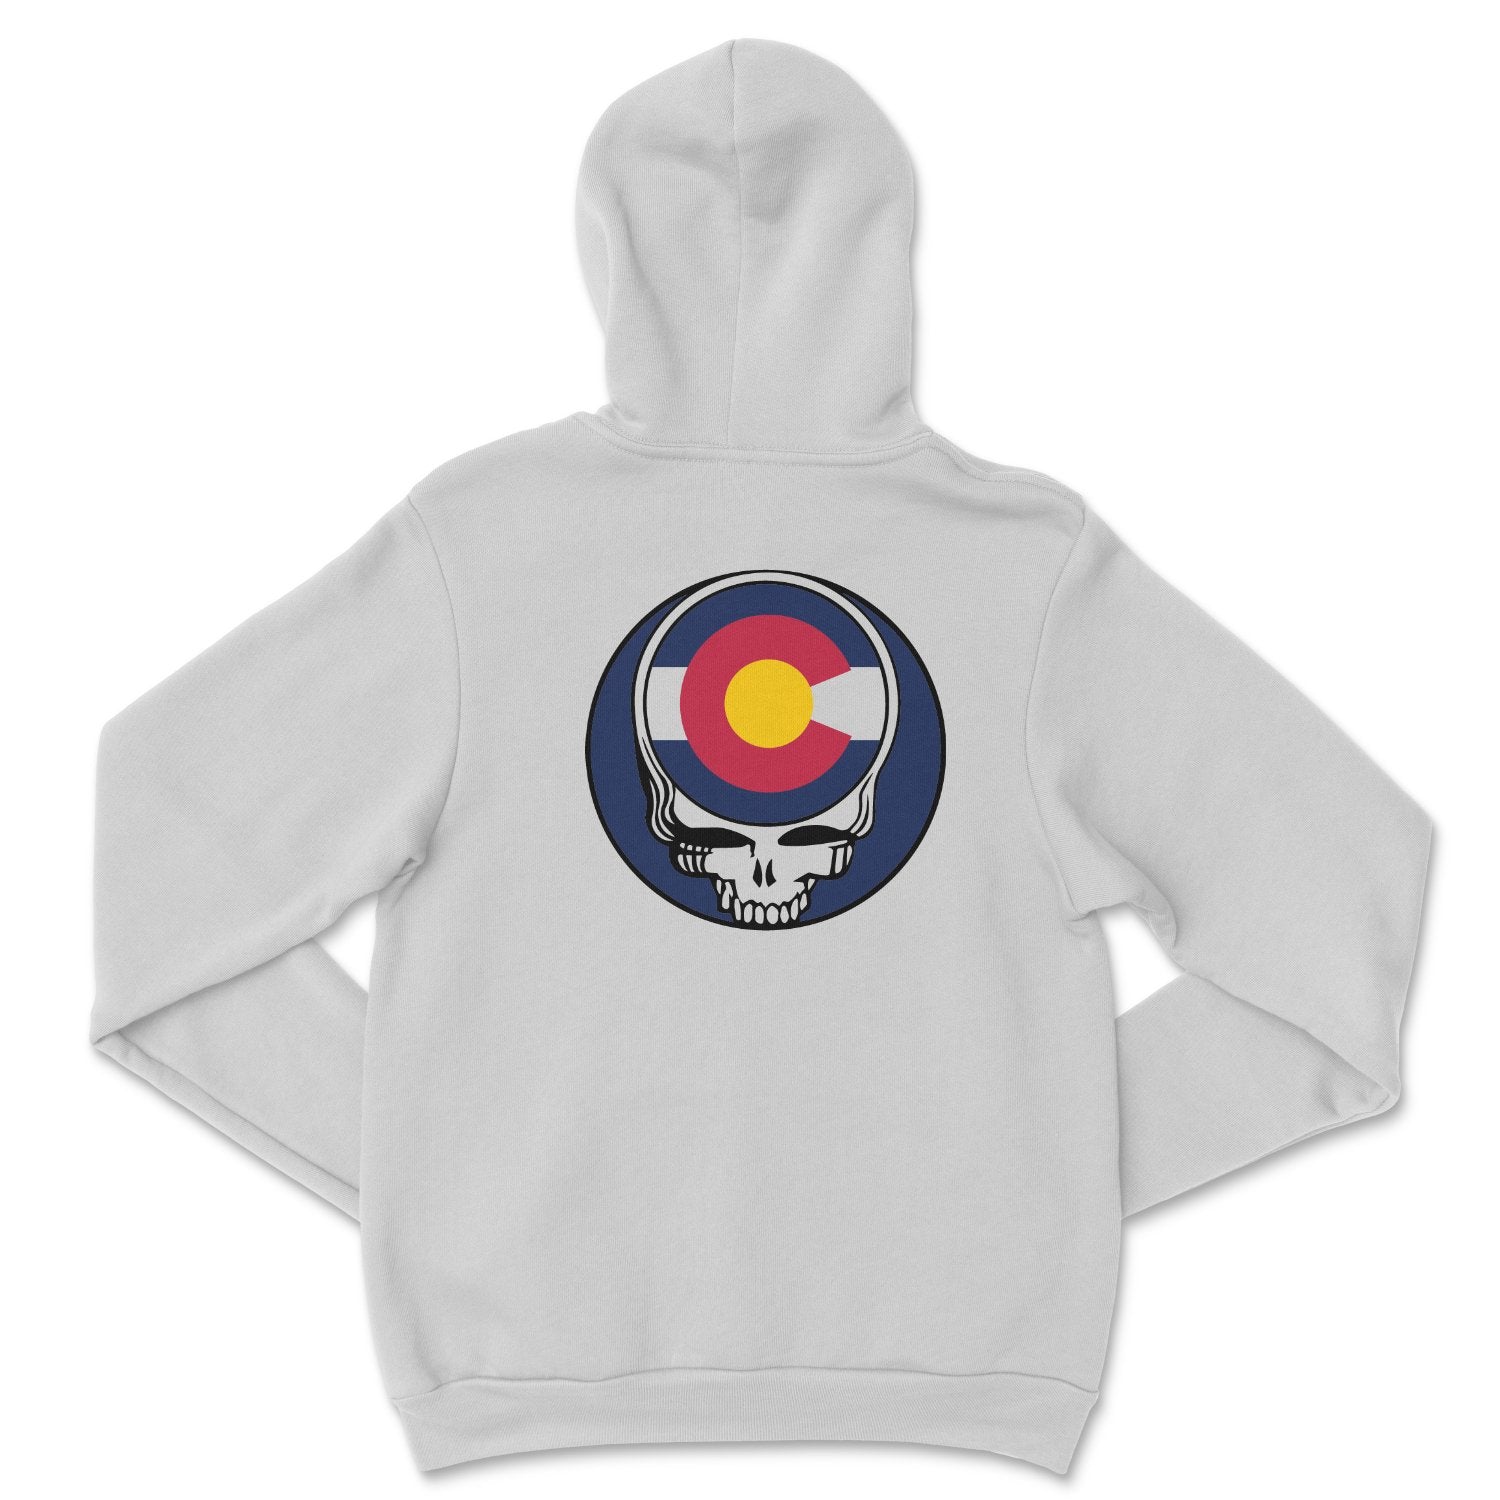 Grateful Dead x TGR Colorado Steal Your State Hoodie - Teton Gravity Research